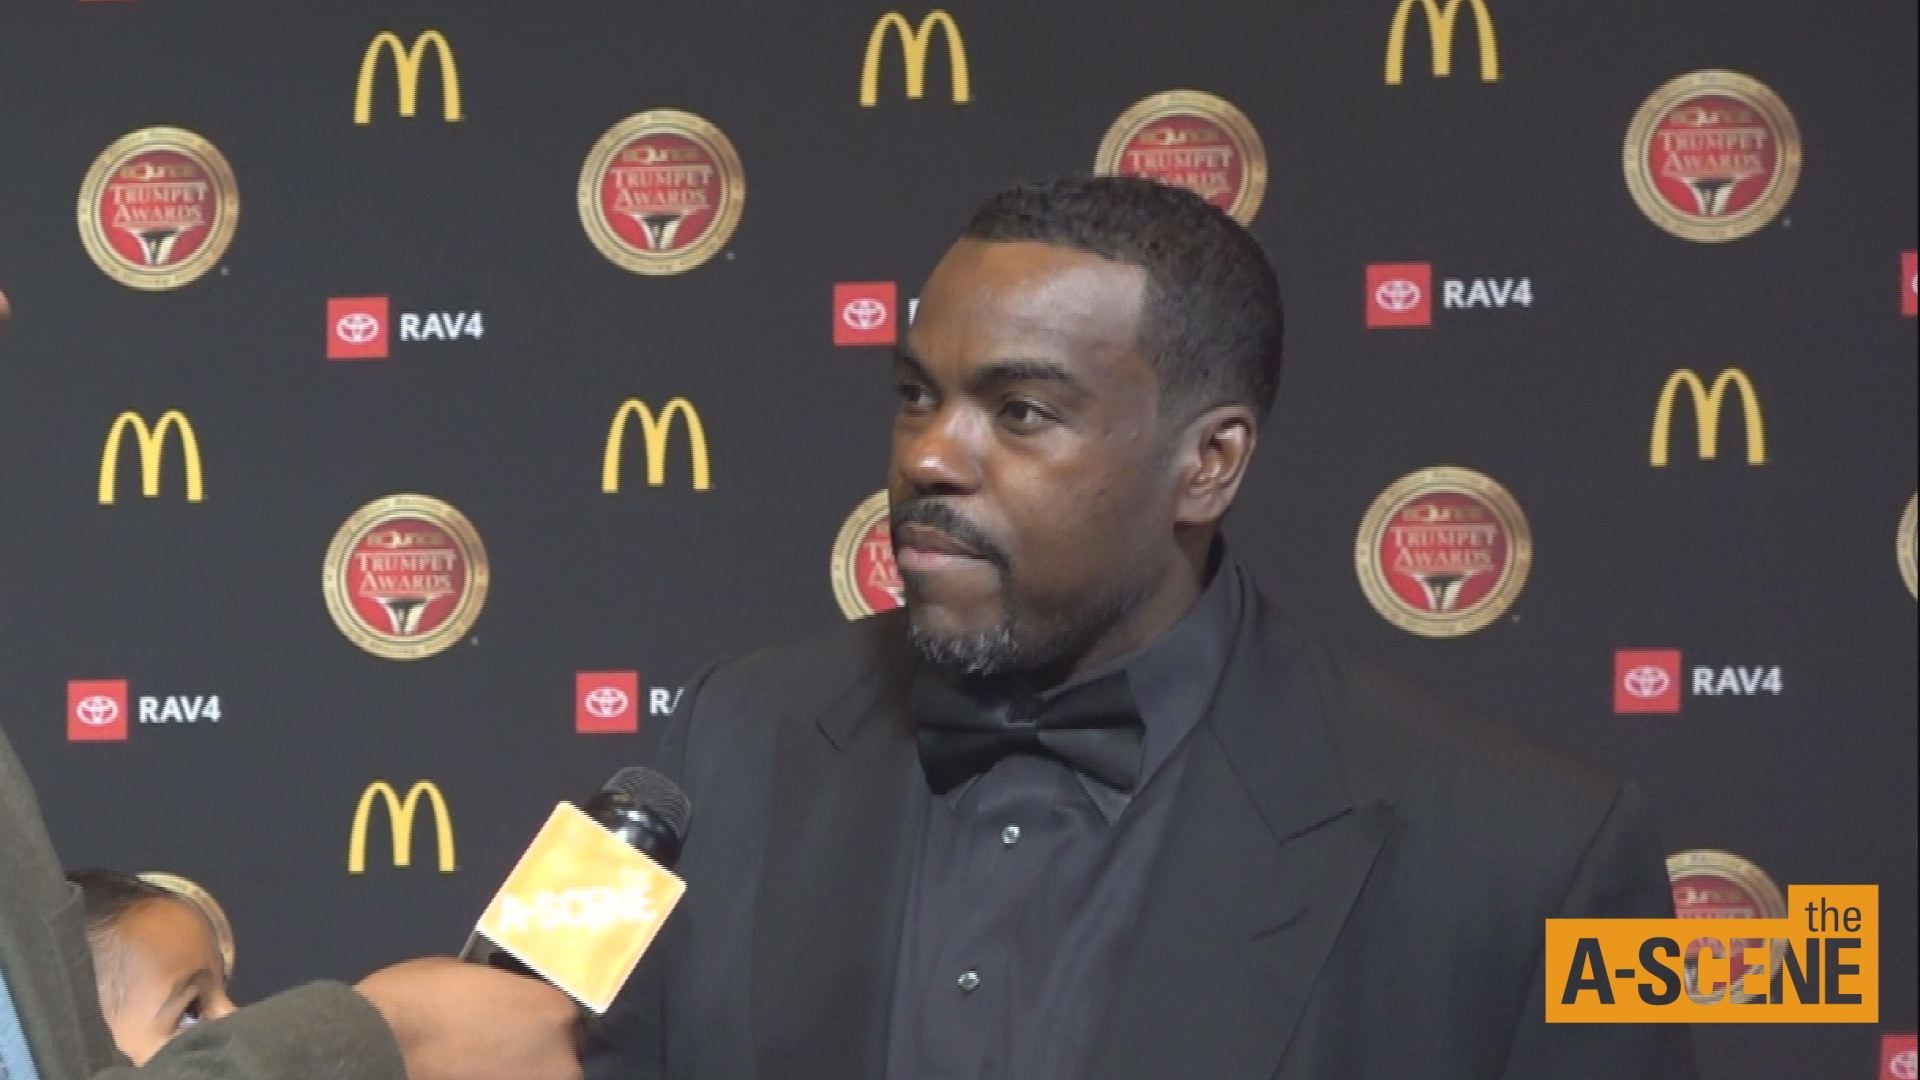 The Music Excellence Award was presented to four-time GRAMMY Award-winning record producer, rapper and songwriter Rodney Jerkins aka Darkchild. In a career spanning nearly 25 years, he has produced and written hits for Michael Jackson, Britney Spears, Whitney Houston, Toni Braxton and Cher among many others.